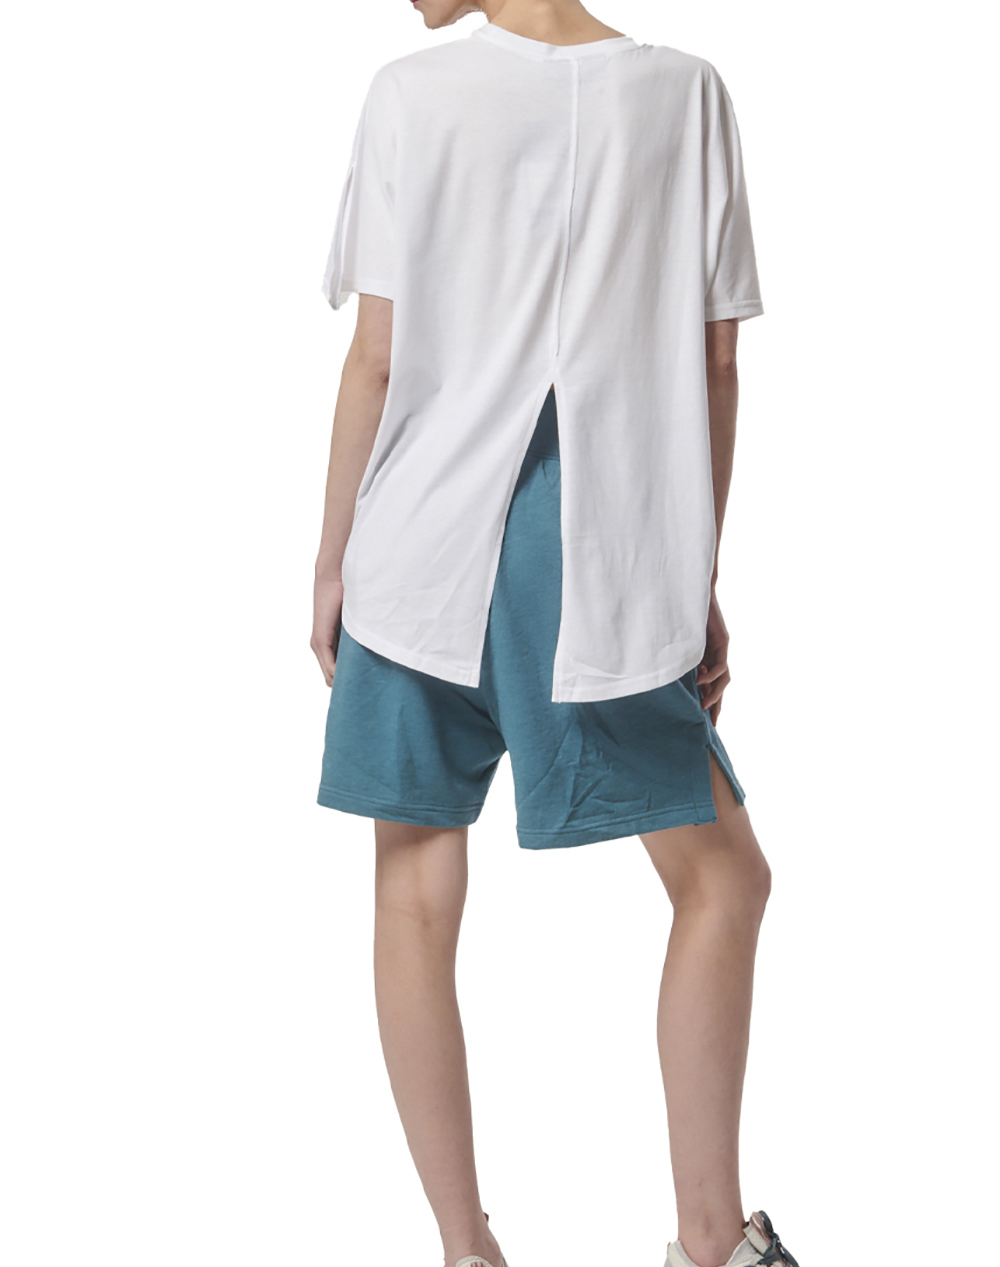 BODY ACTION WOMENS OVERSIZED TOP W/CUTS